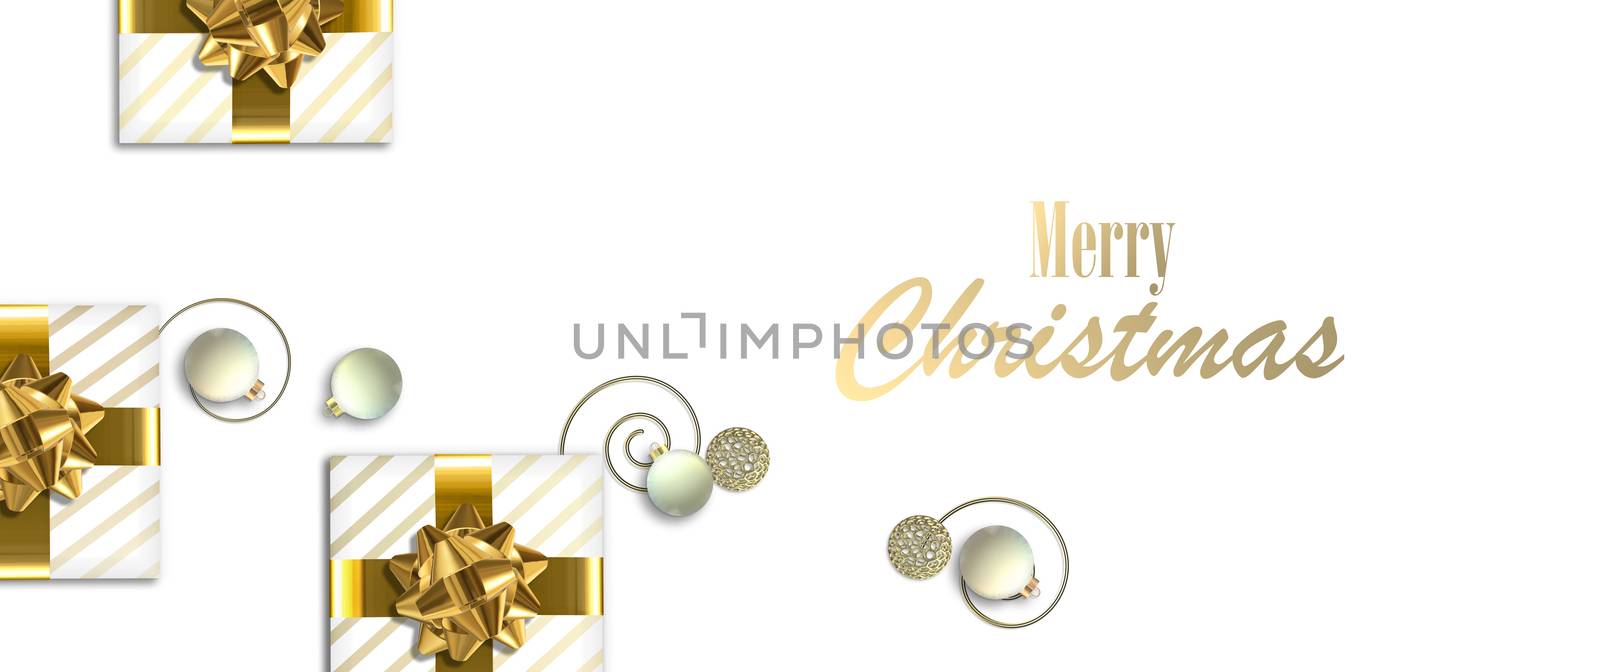 Holiday background on white. Xmas gift boxes with golden bow, Xmas balls baubles on white background. Text Merry Christmas. 3D illustration. Festive 3D Christmas flat lay design.